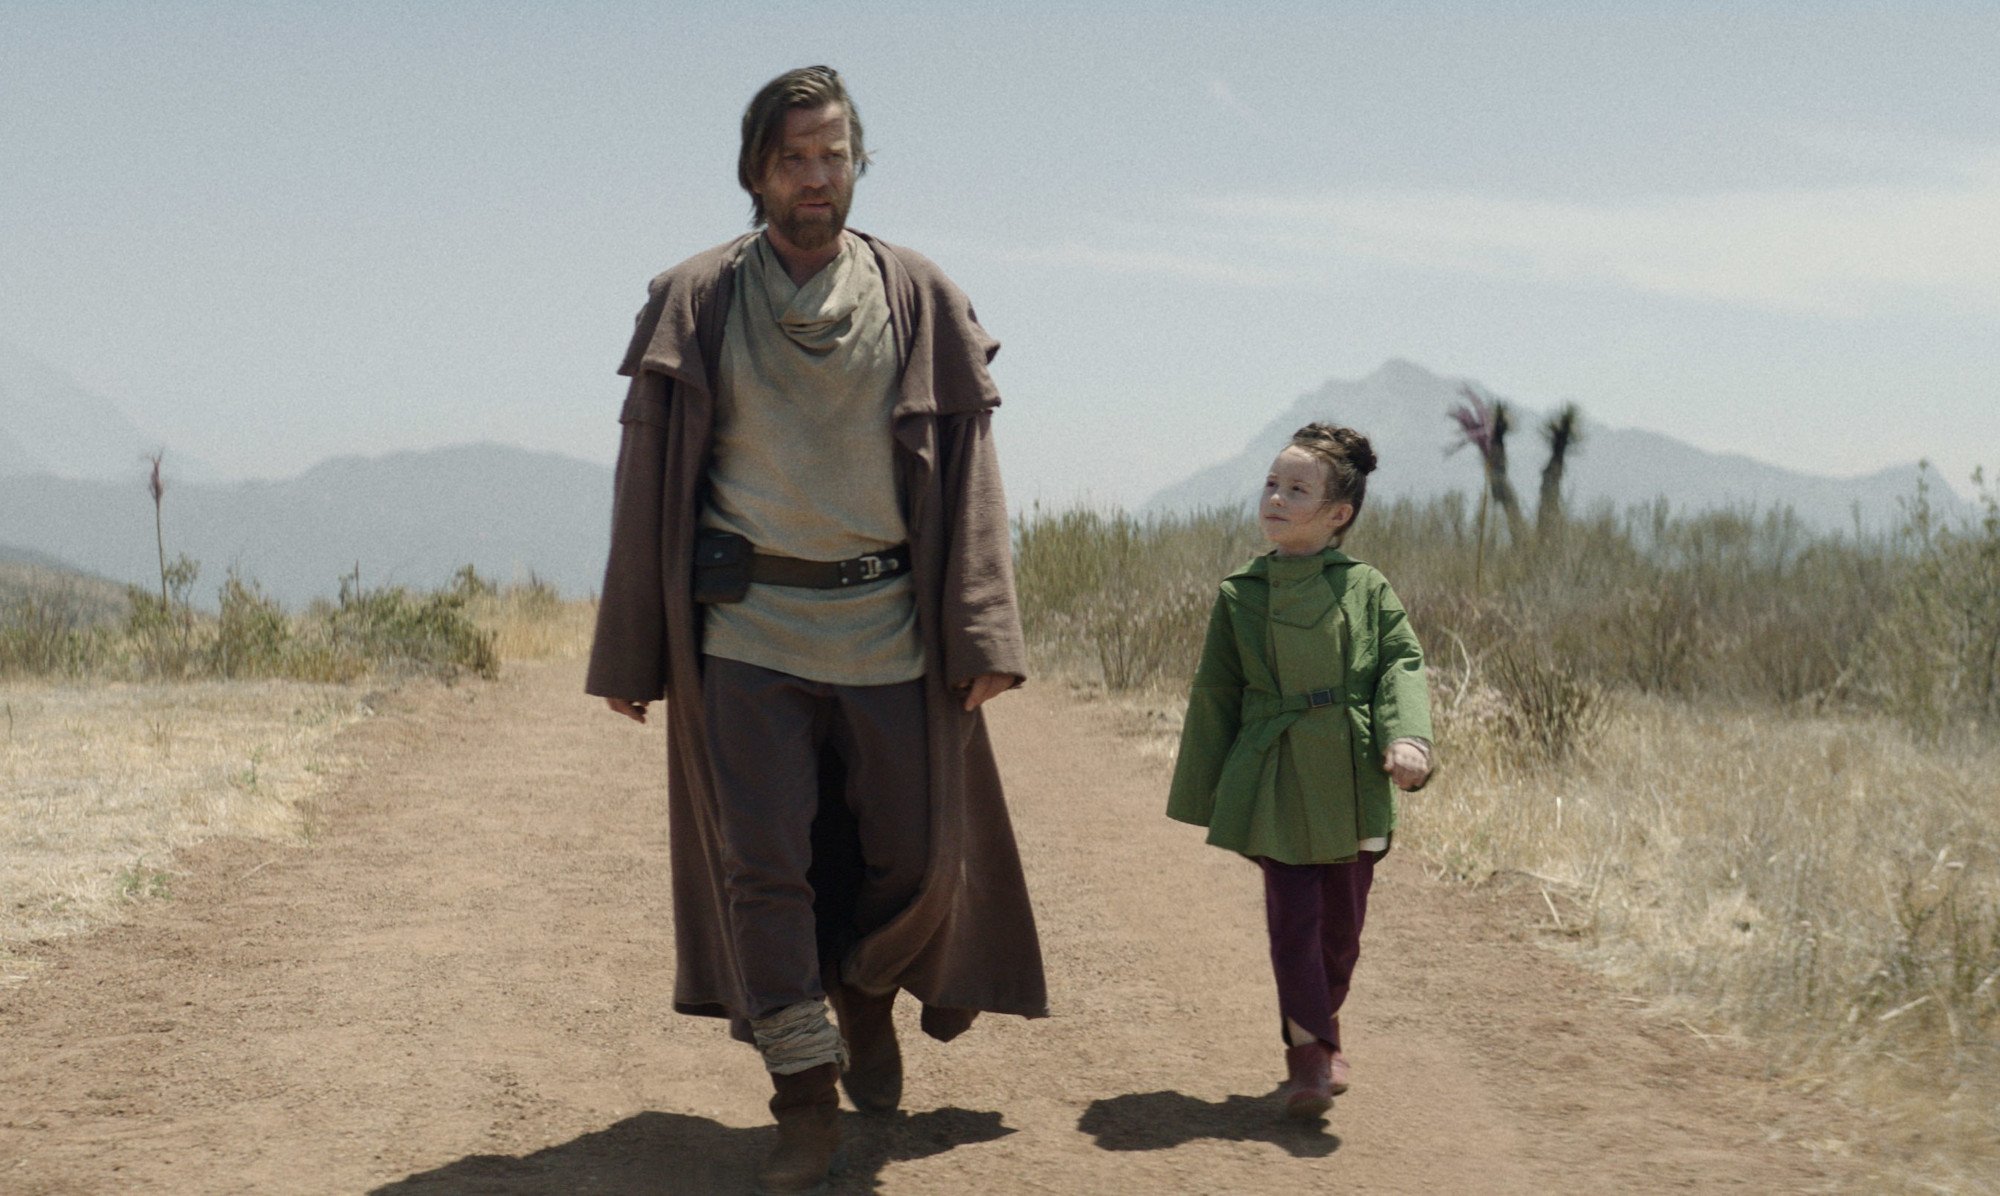 Ewan McGregor and Vivien Lyra Blair as Obi-Wan and Leia in 'Obi-Wan Kenobi,' which hasn't been confirmed for season 2. The two are walking in the desert, and Leia is looking up at him.